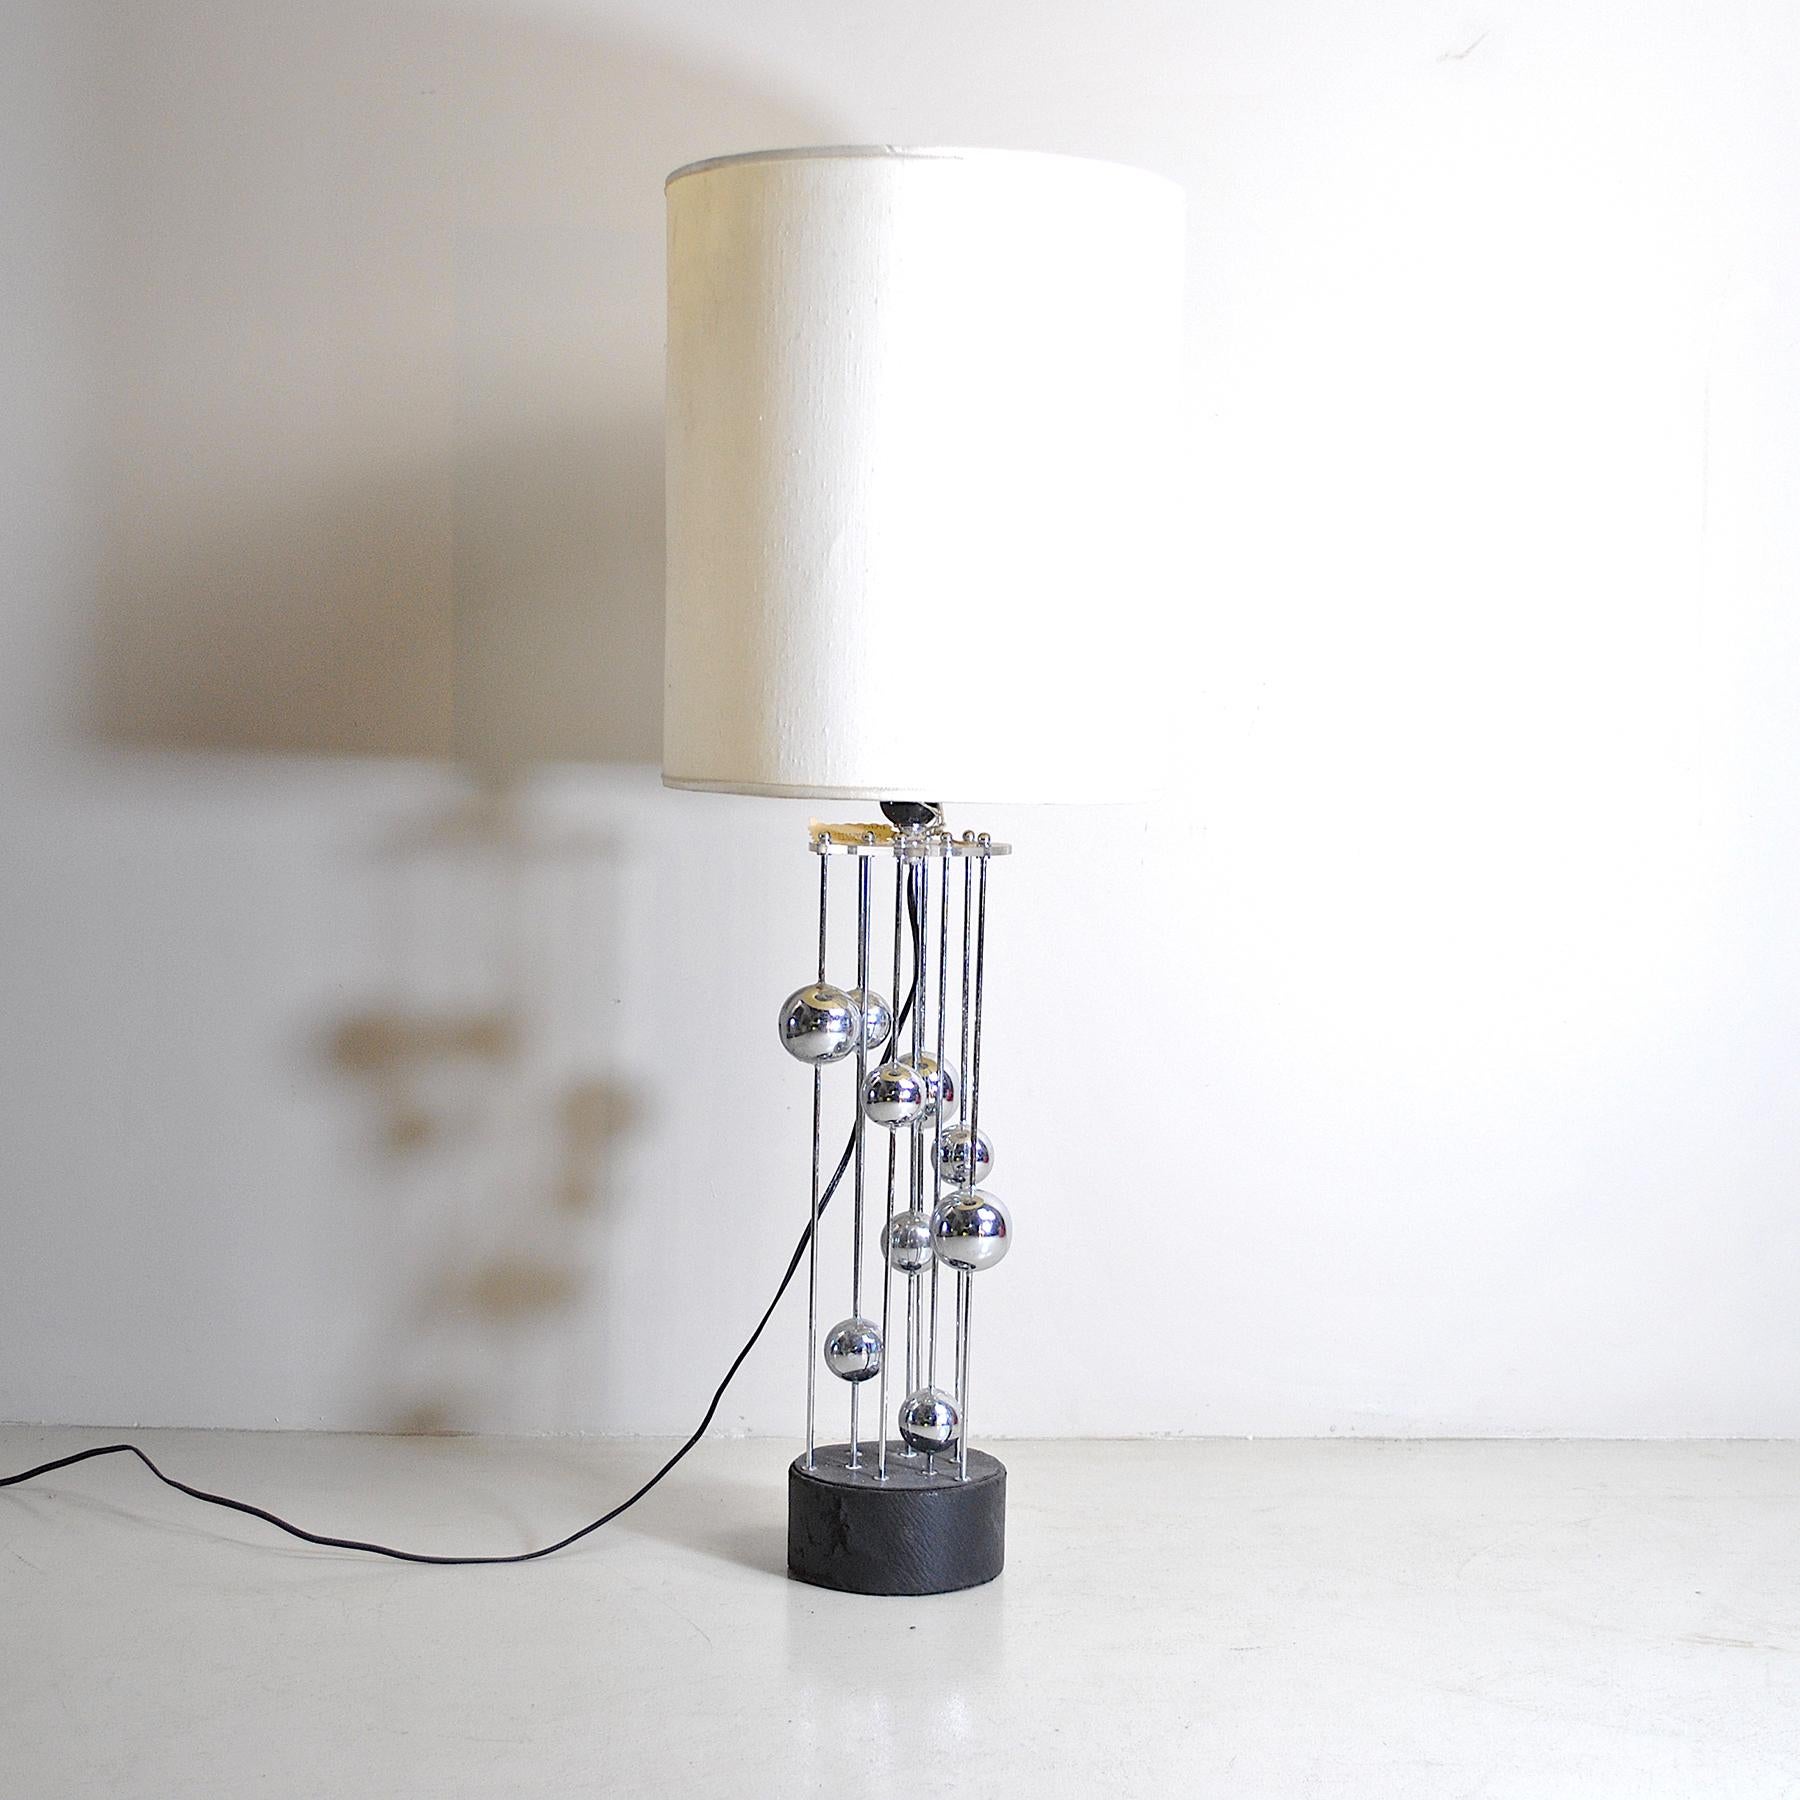 Italian Midcentury Table Lamp Space Age In Good Condition For Sale In bari, IT